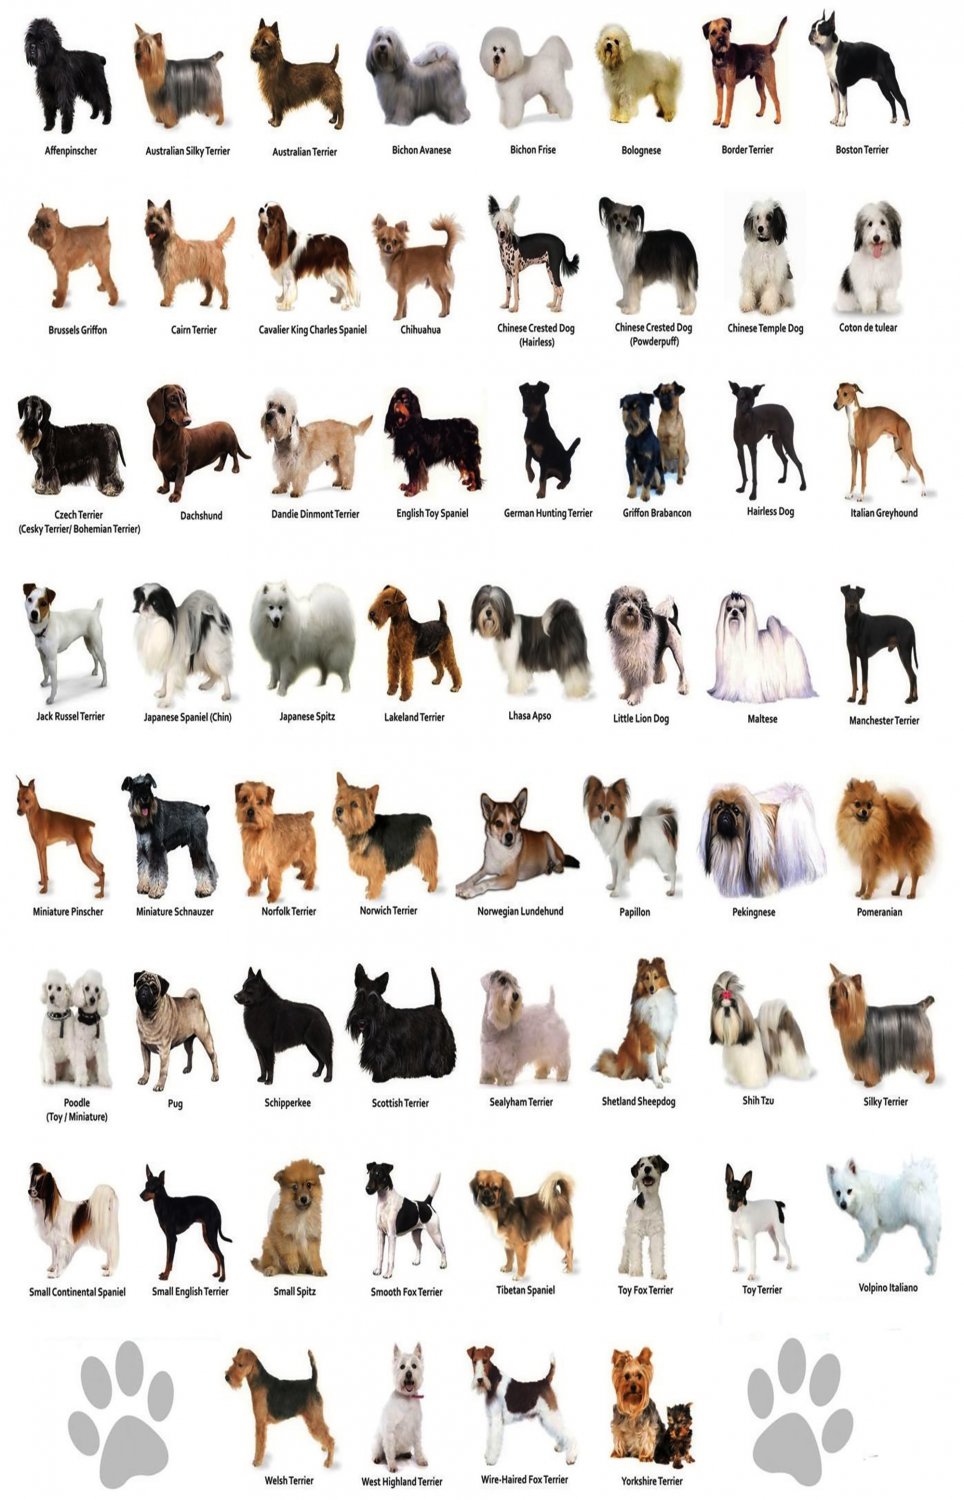 The Dog Different Dog Breeds Infographic Chart 18"x28" (45cm/70cm) Poster